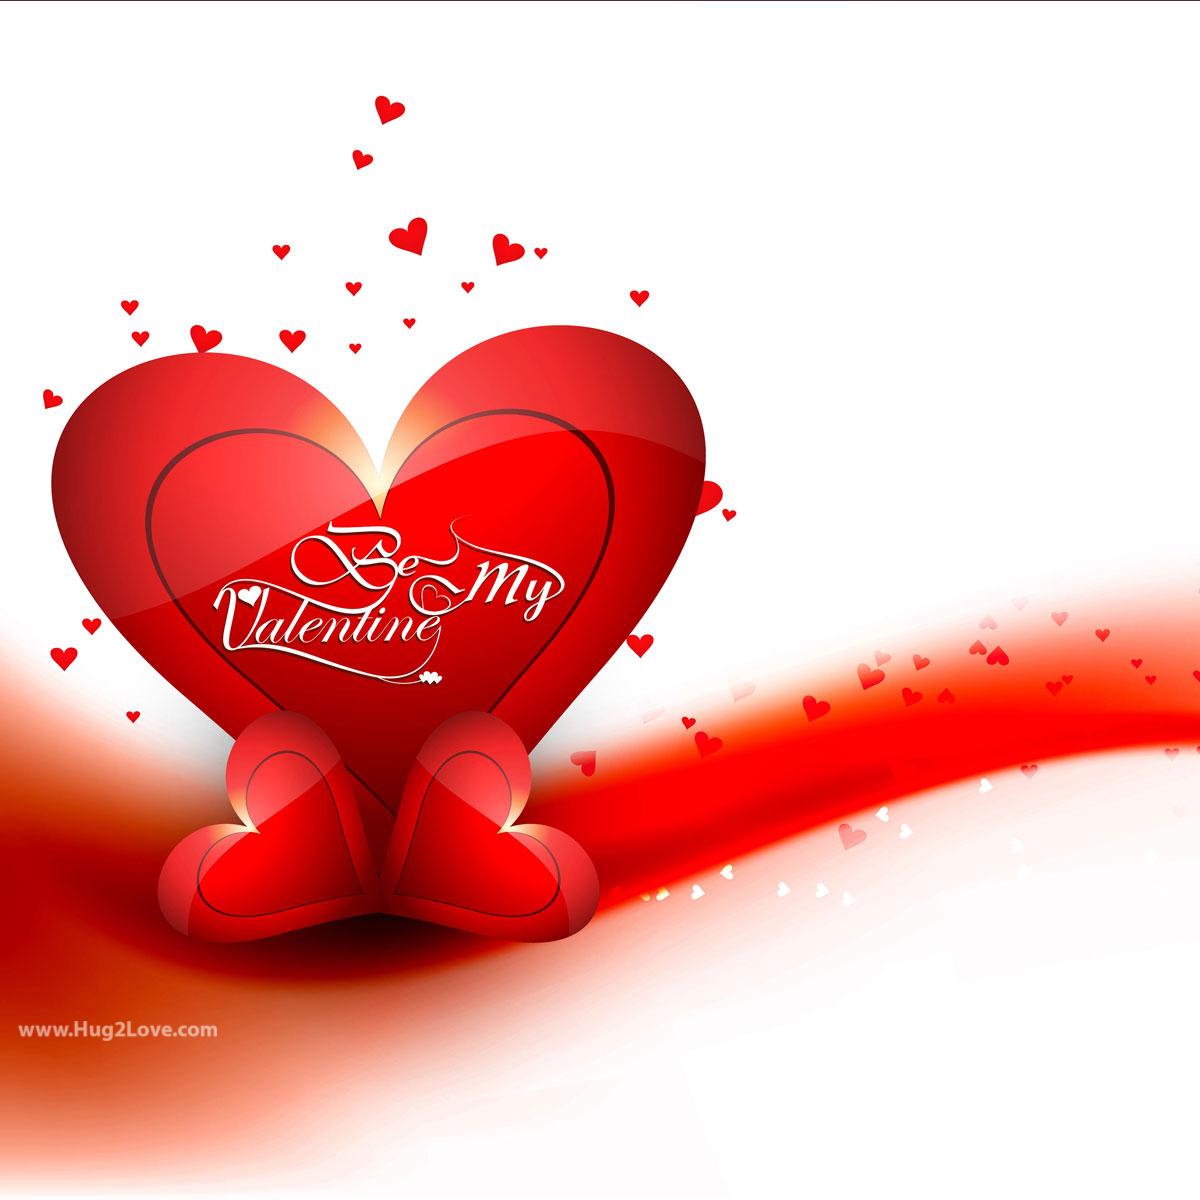 Free download 100 Happy Valentines Day Image Wallpaper 2020